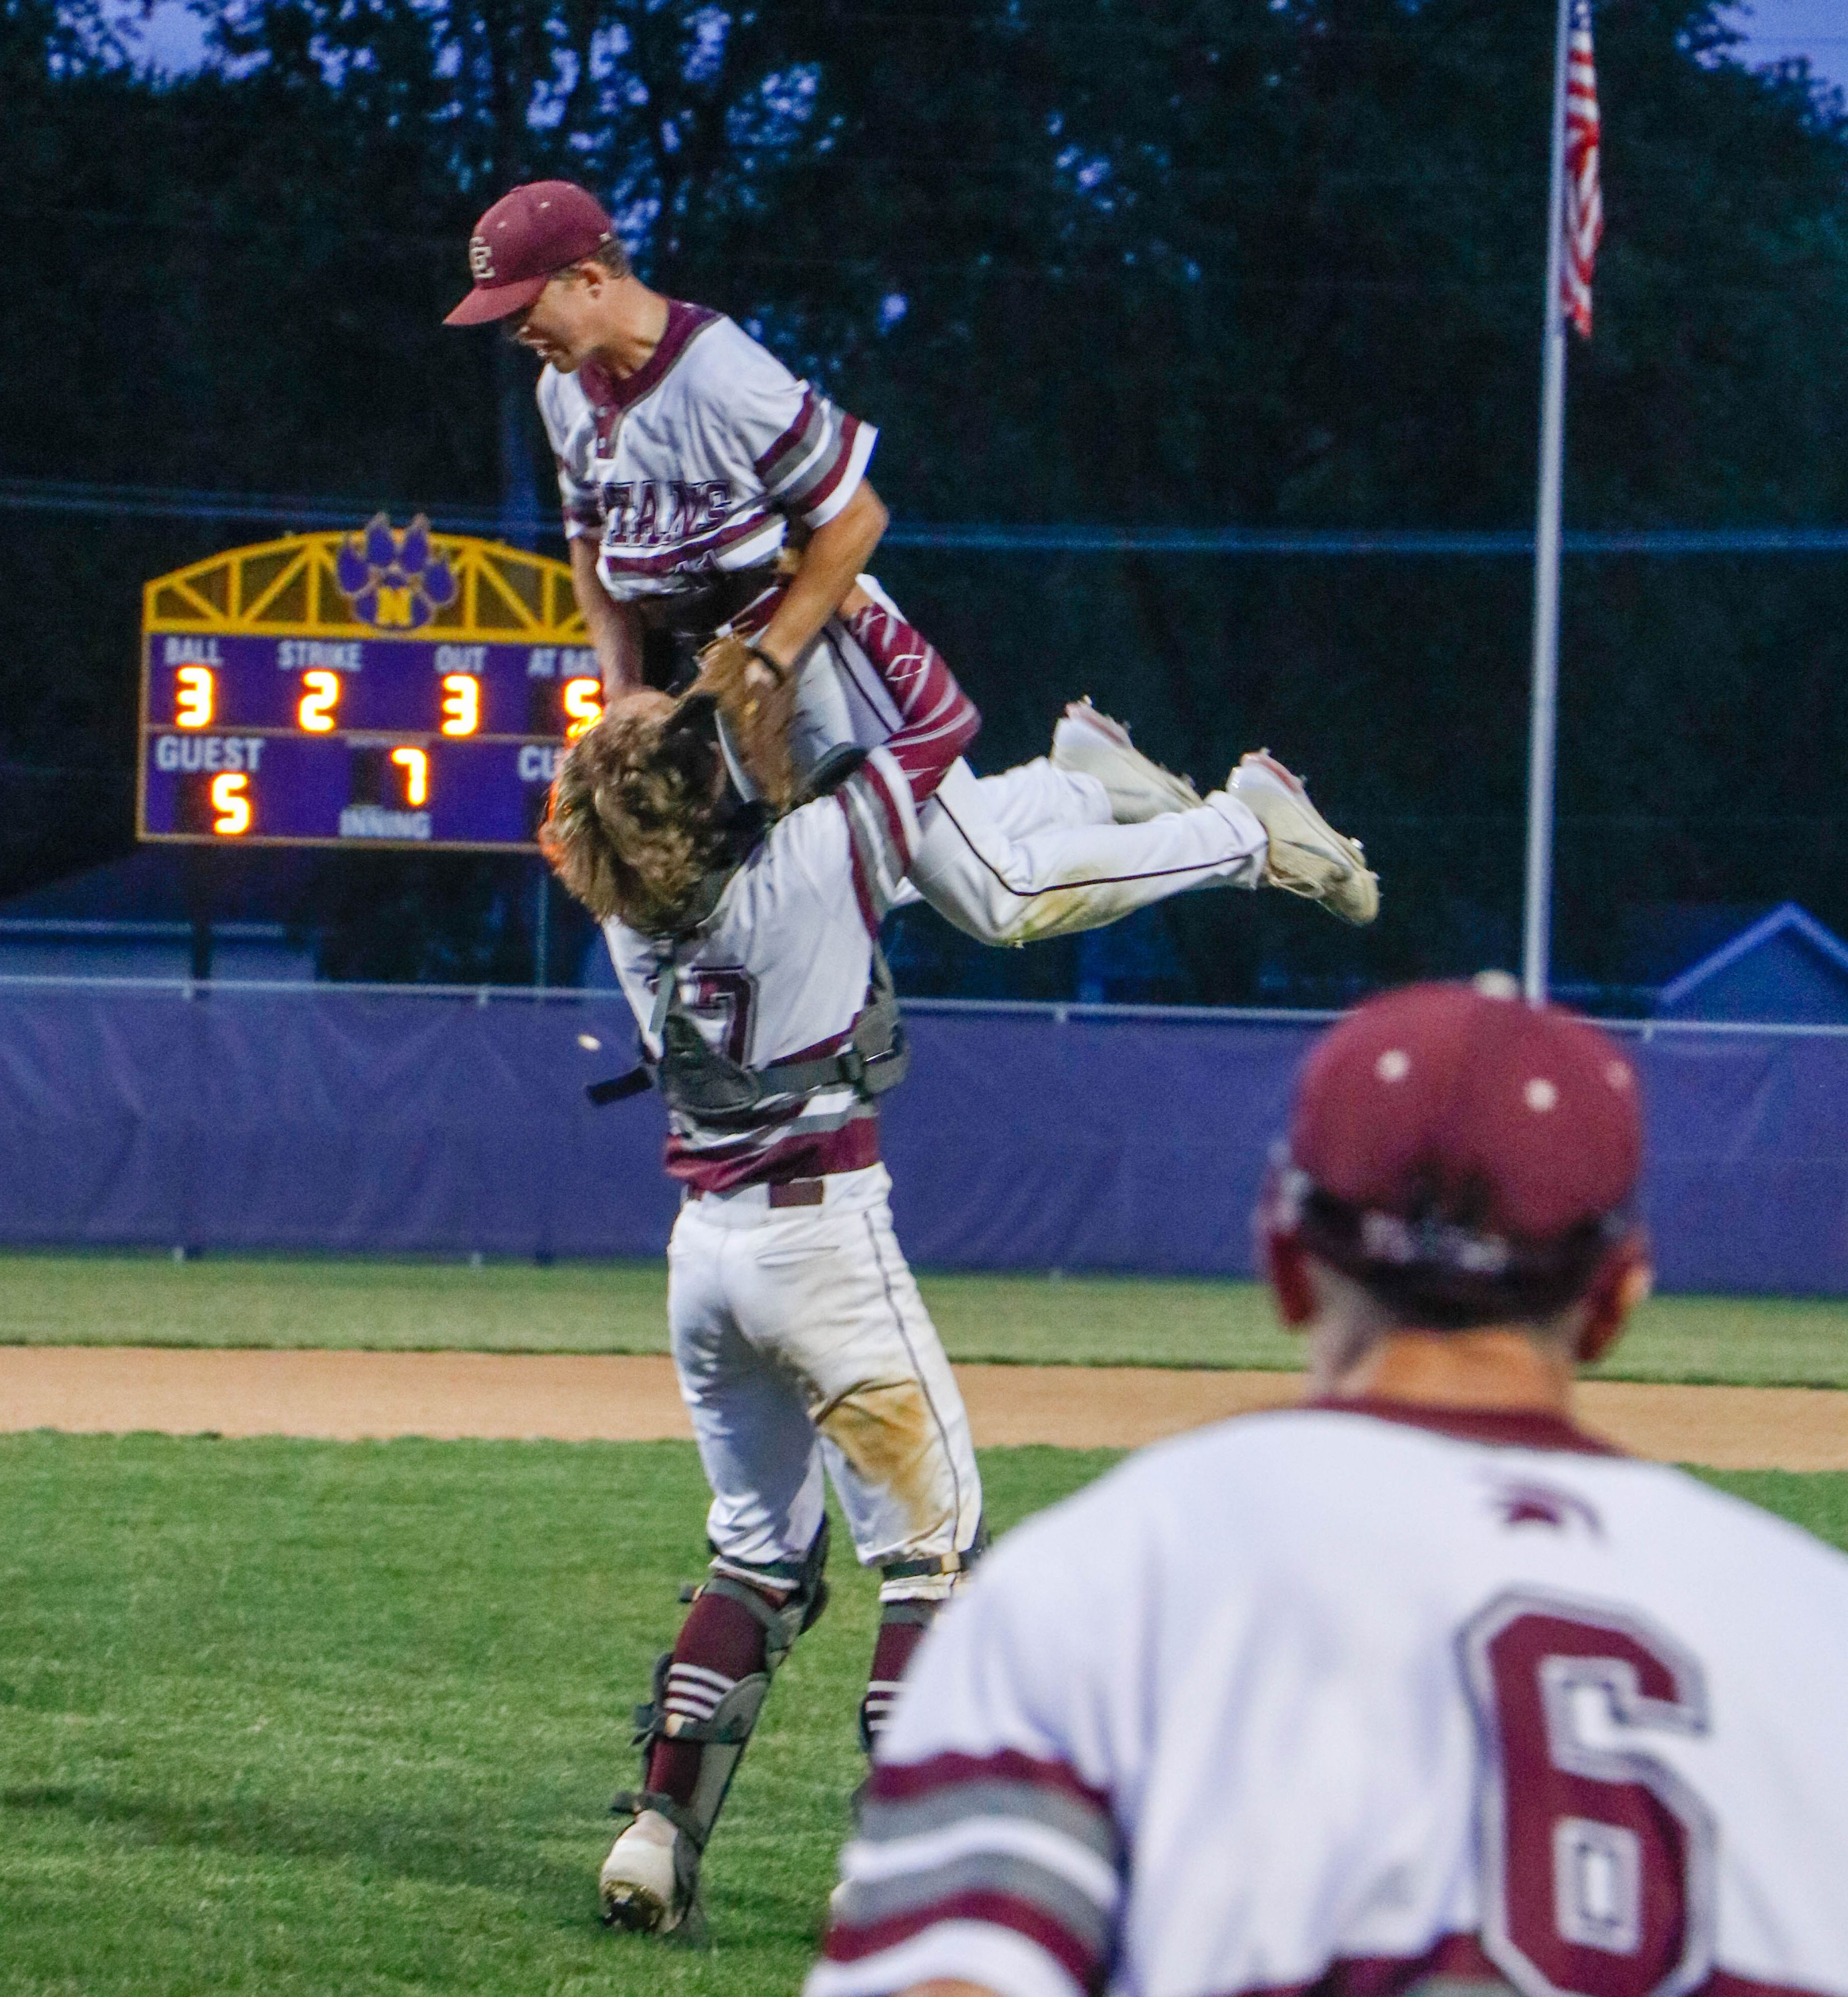 Grundy Center clinched its first state baseball tournament berth since 1993 with a dramatic win over Coon Rapids-Bayard. (Photo by Tyler Meyers Photography)